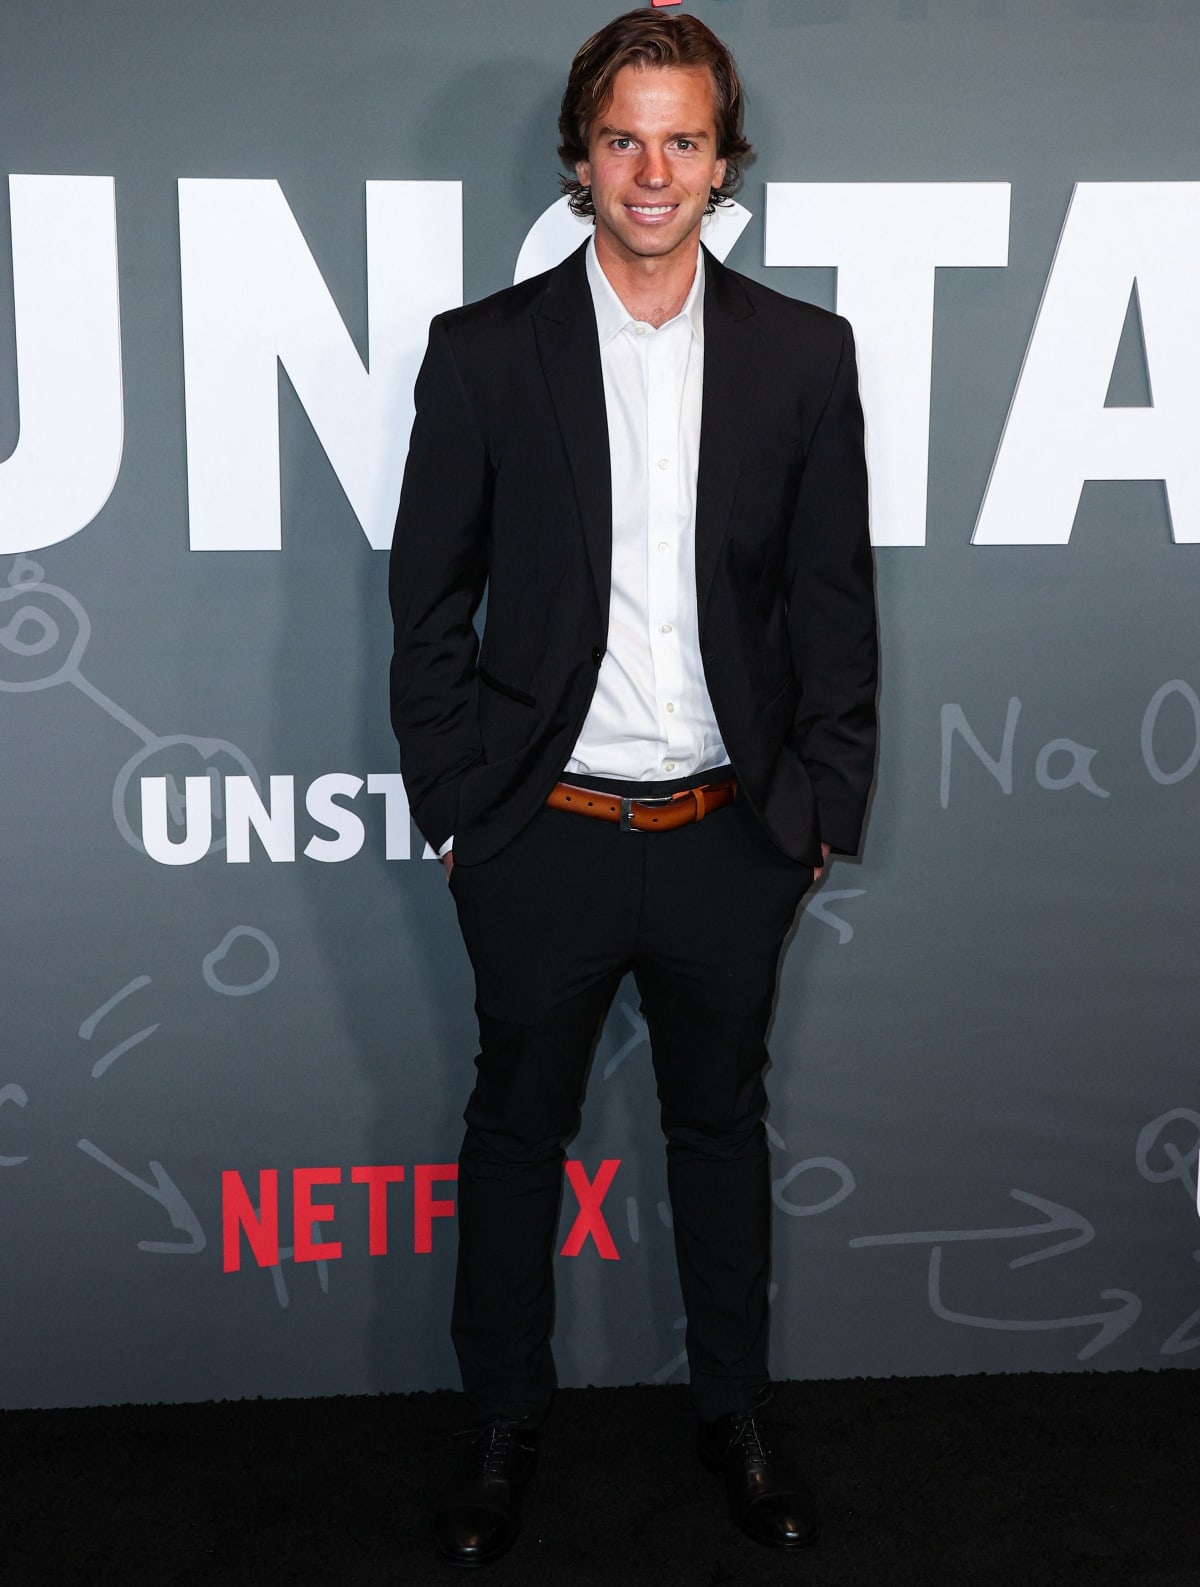 Tom Allen at the Los Angeles premiere of Unstable